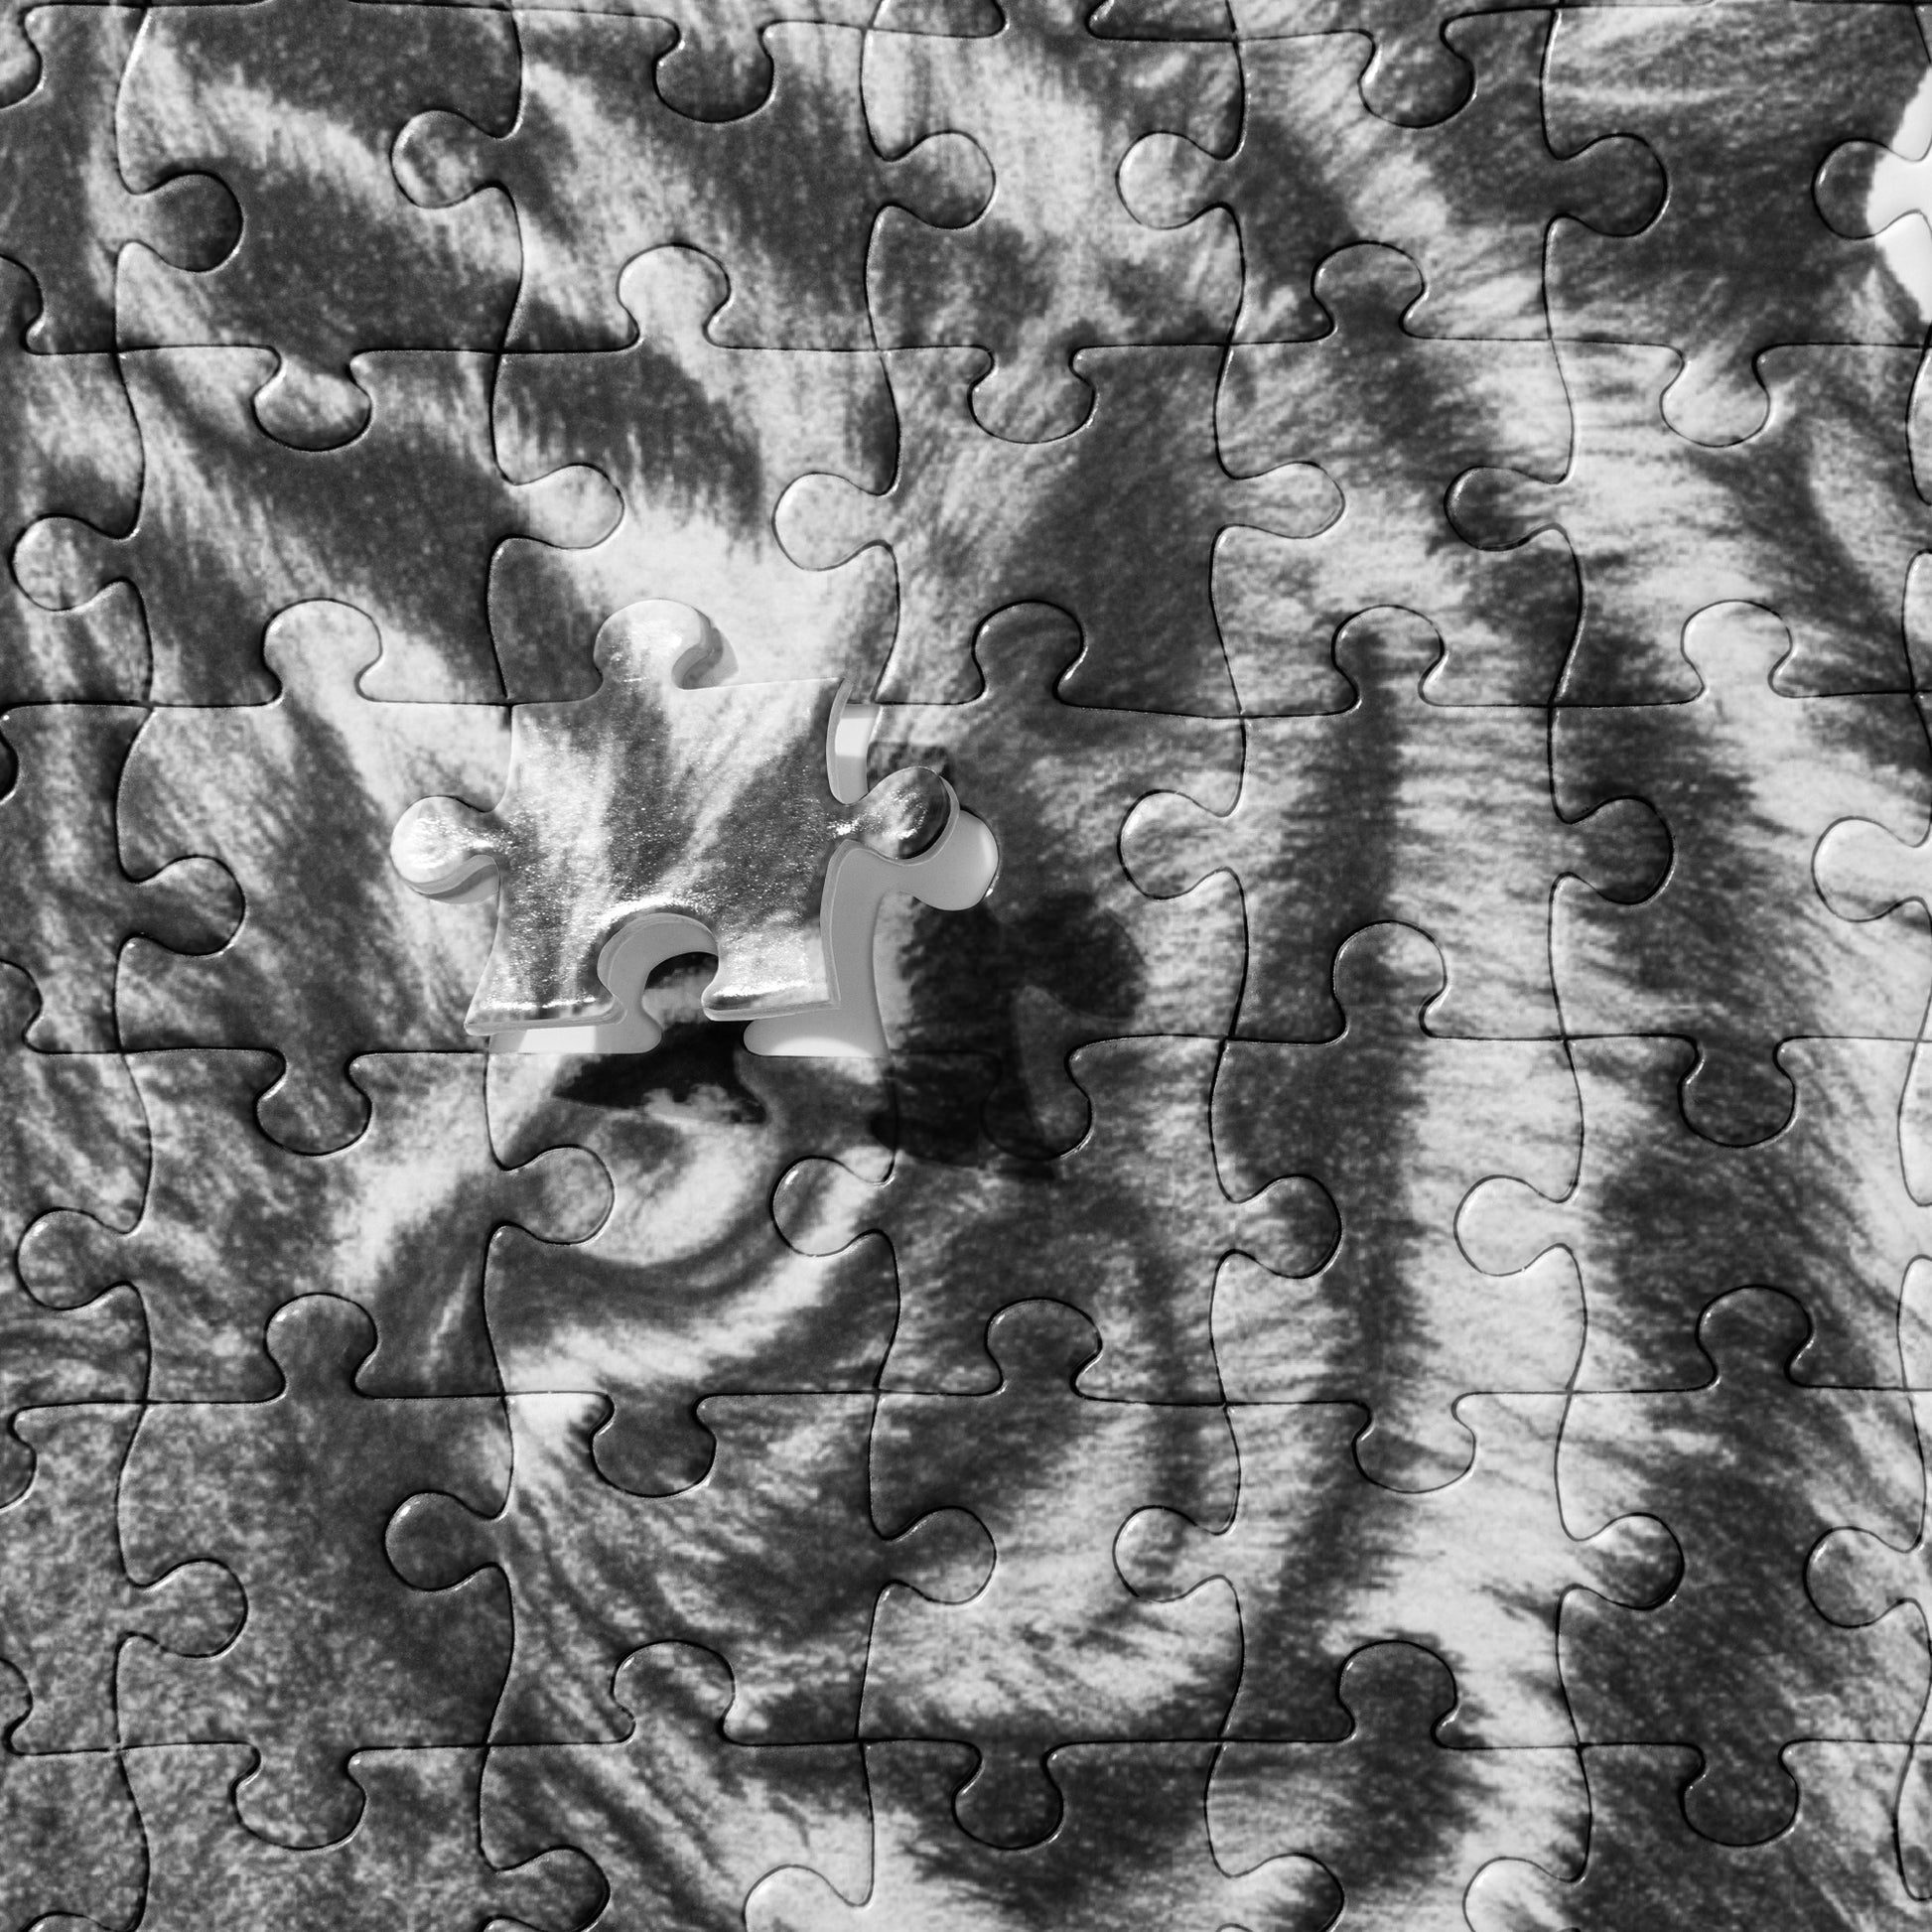 The "Tiger Jigsaw Puzzle" is from a drawing of mine created with a graphite pencil. It has been digitally optimized and transferred to a pressed paper chipboard which makes it suitable for framing.